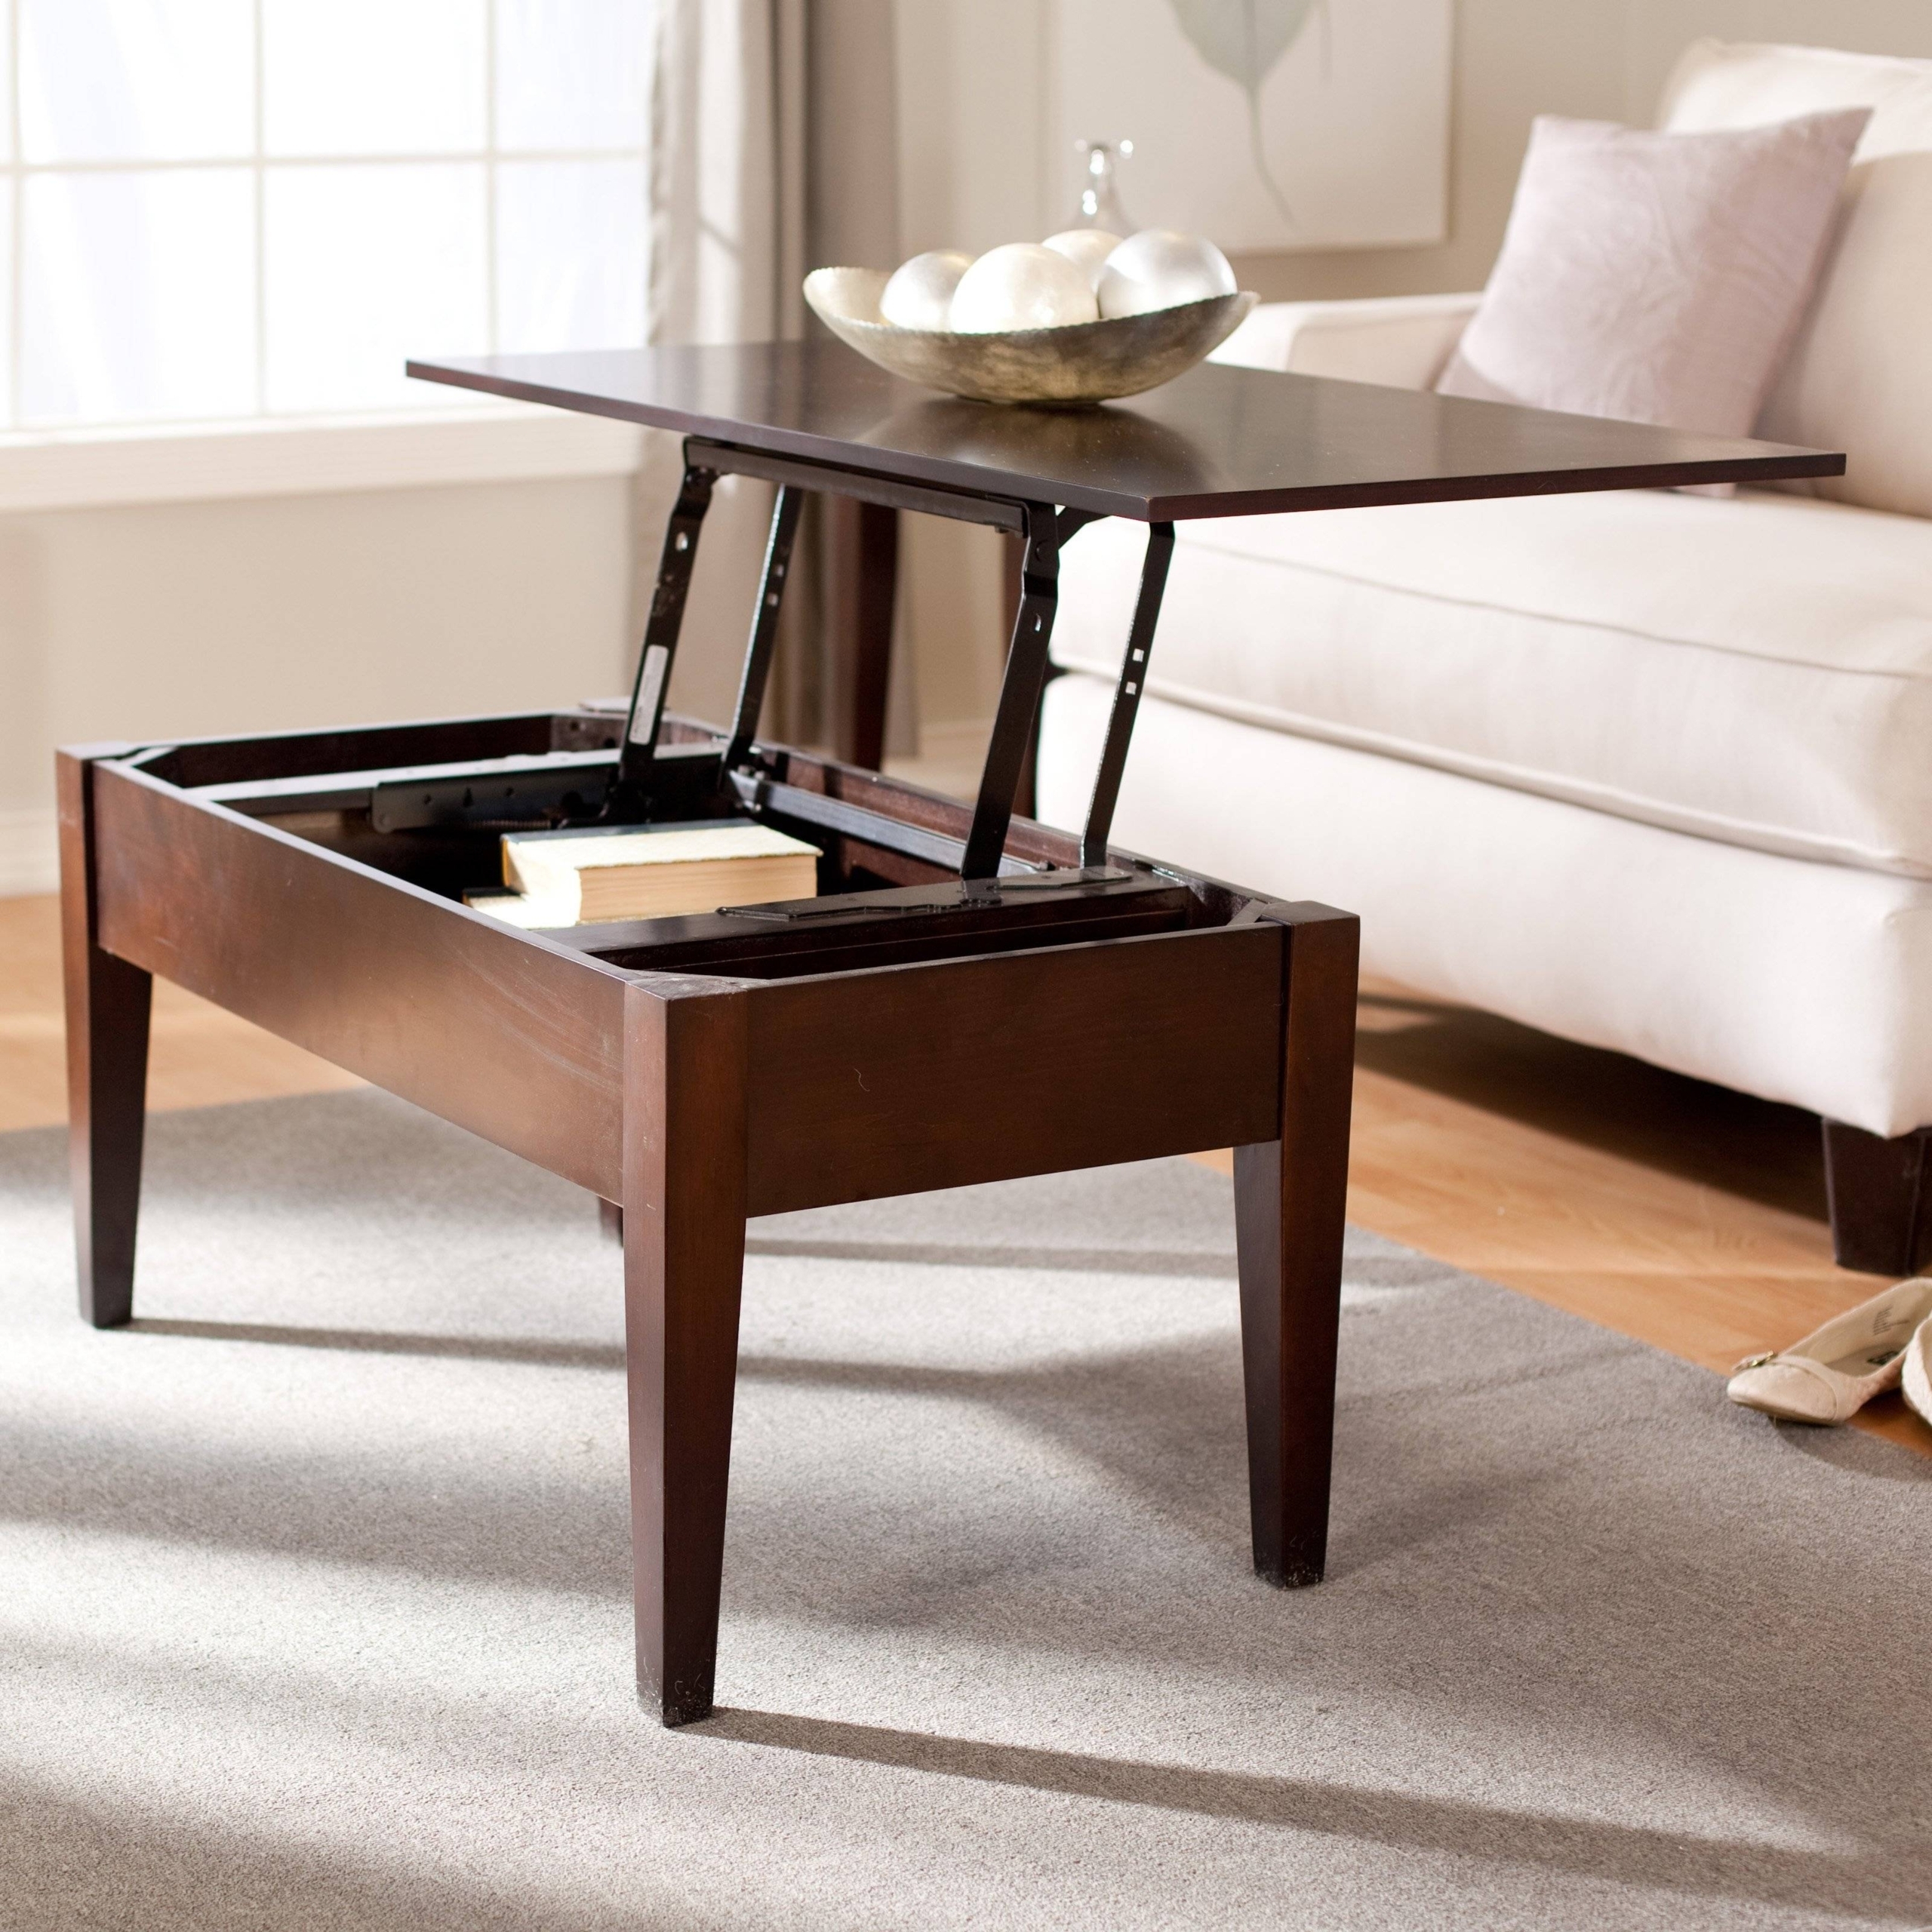 Lift Coffee Tables Ideas On Foter